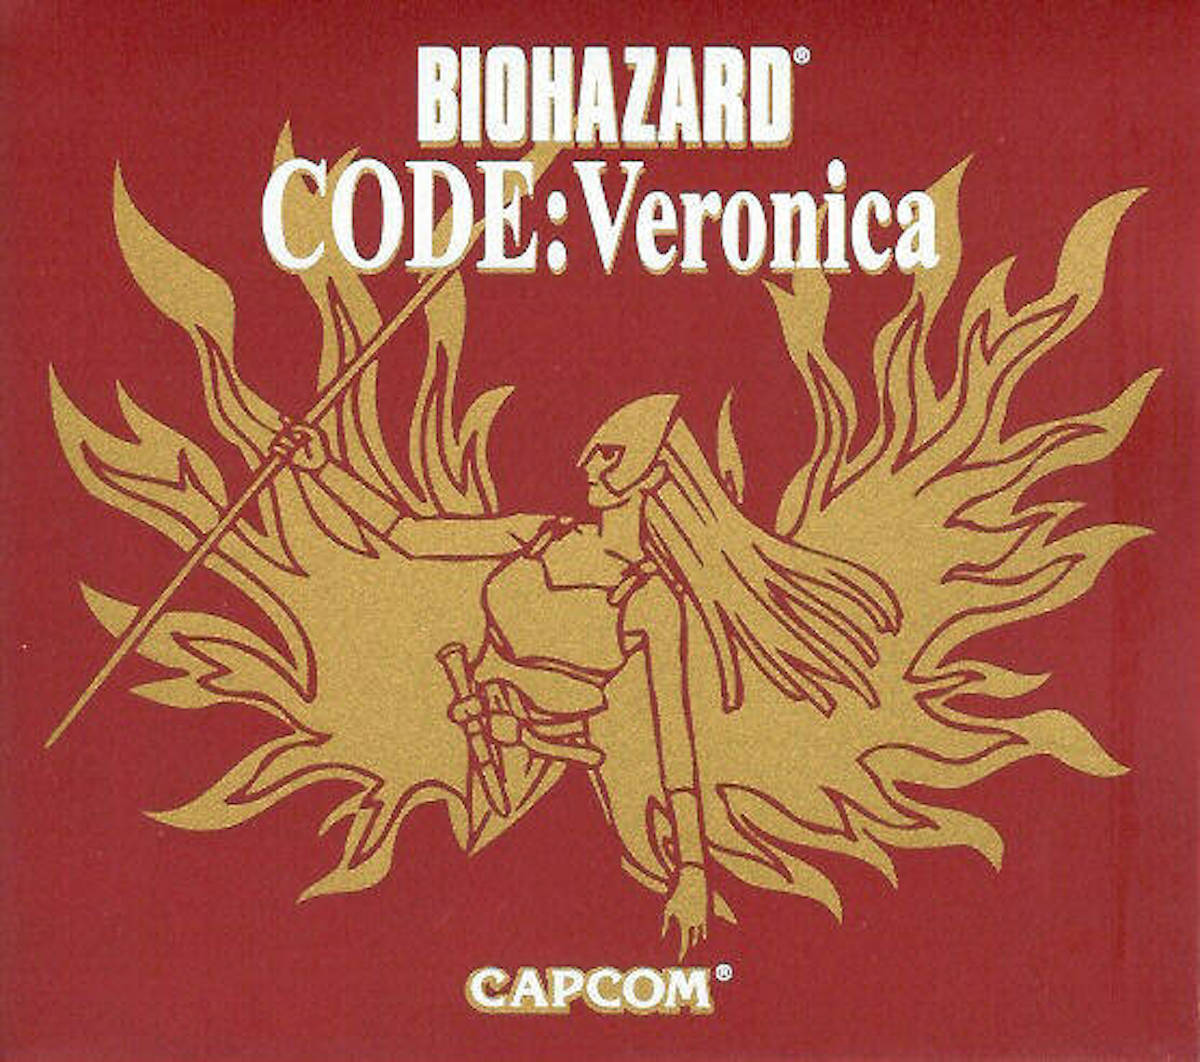 Japanese Resident Evil CODE: Veronica collector's edition cover